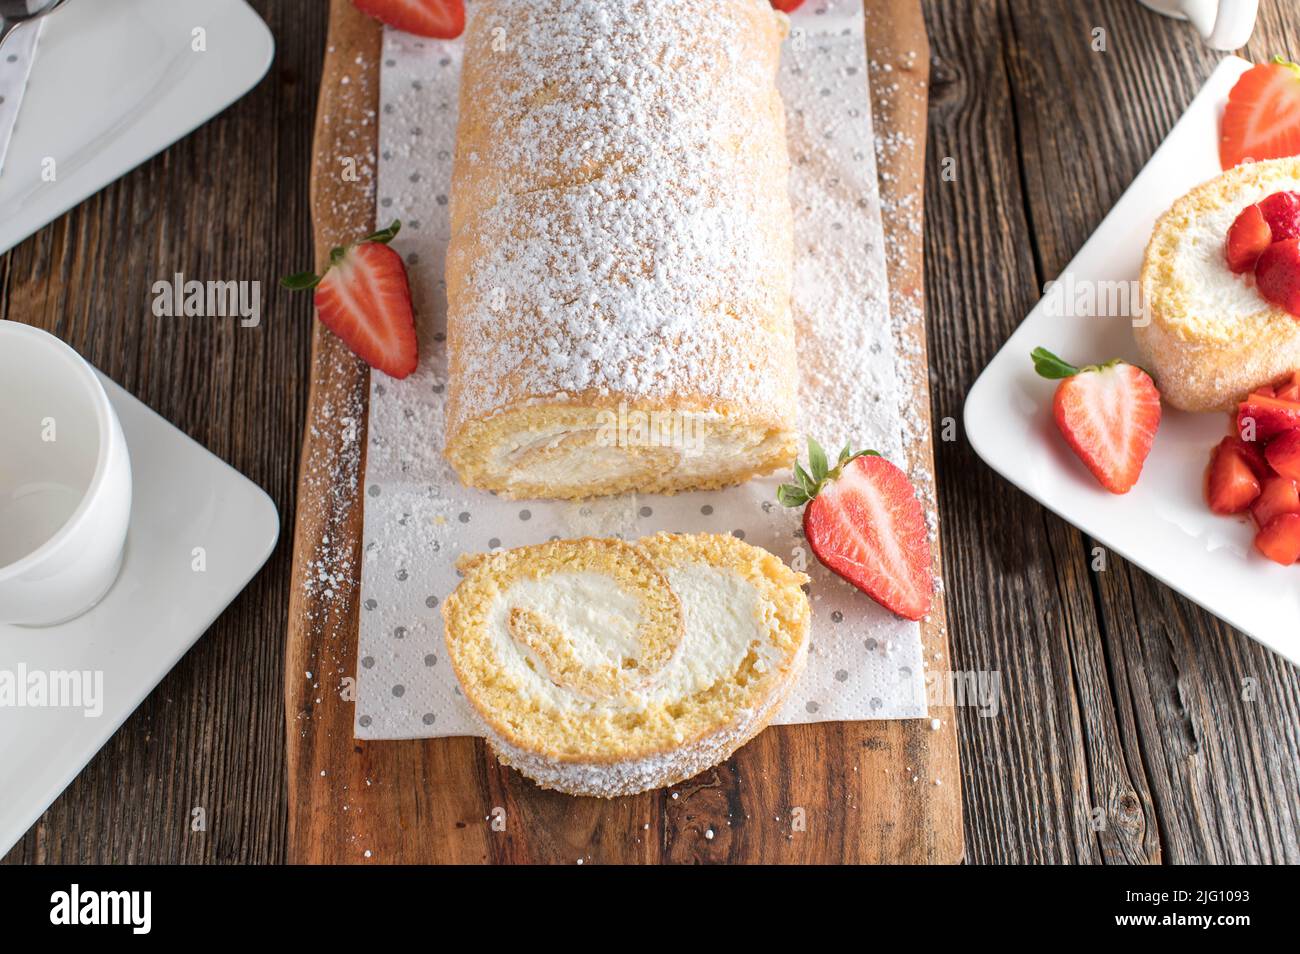 Swiss roll with cream filling  isolated on wooden table Stock Photo